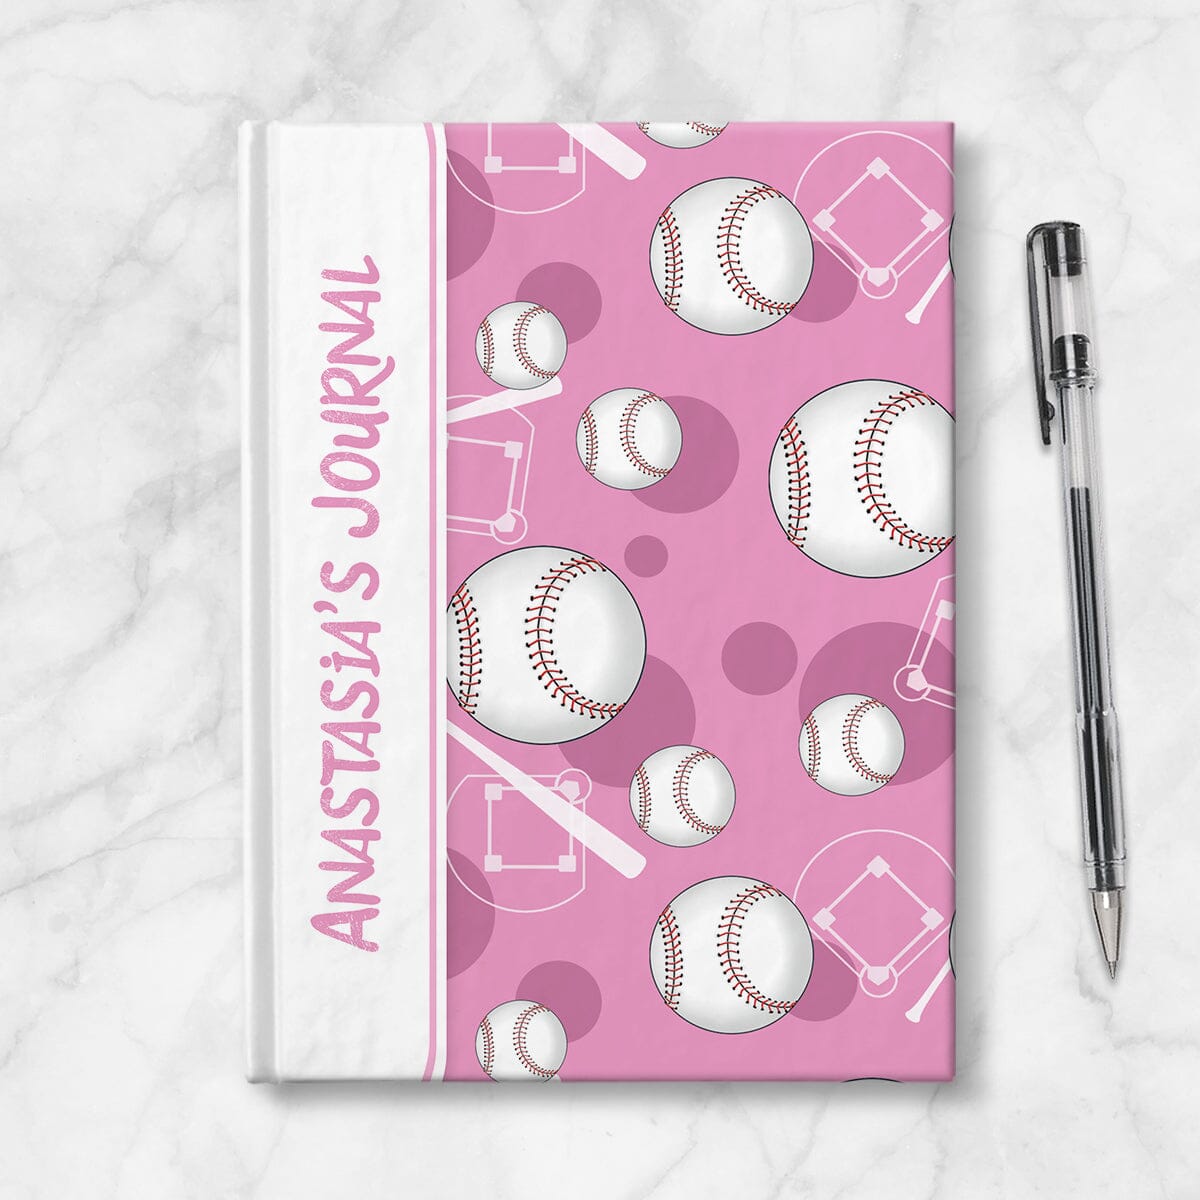 Personalized Pink Baseball Journal at Artistically Invited. Image shows the book on a countertop next to a pen.